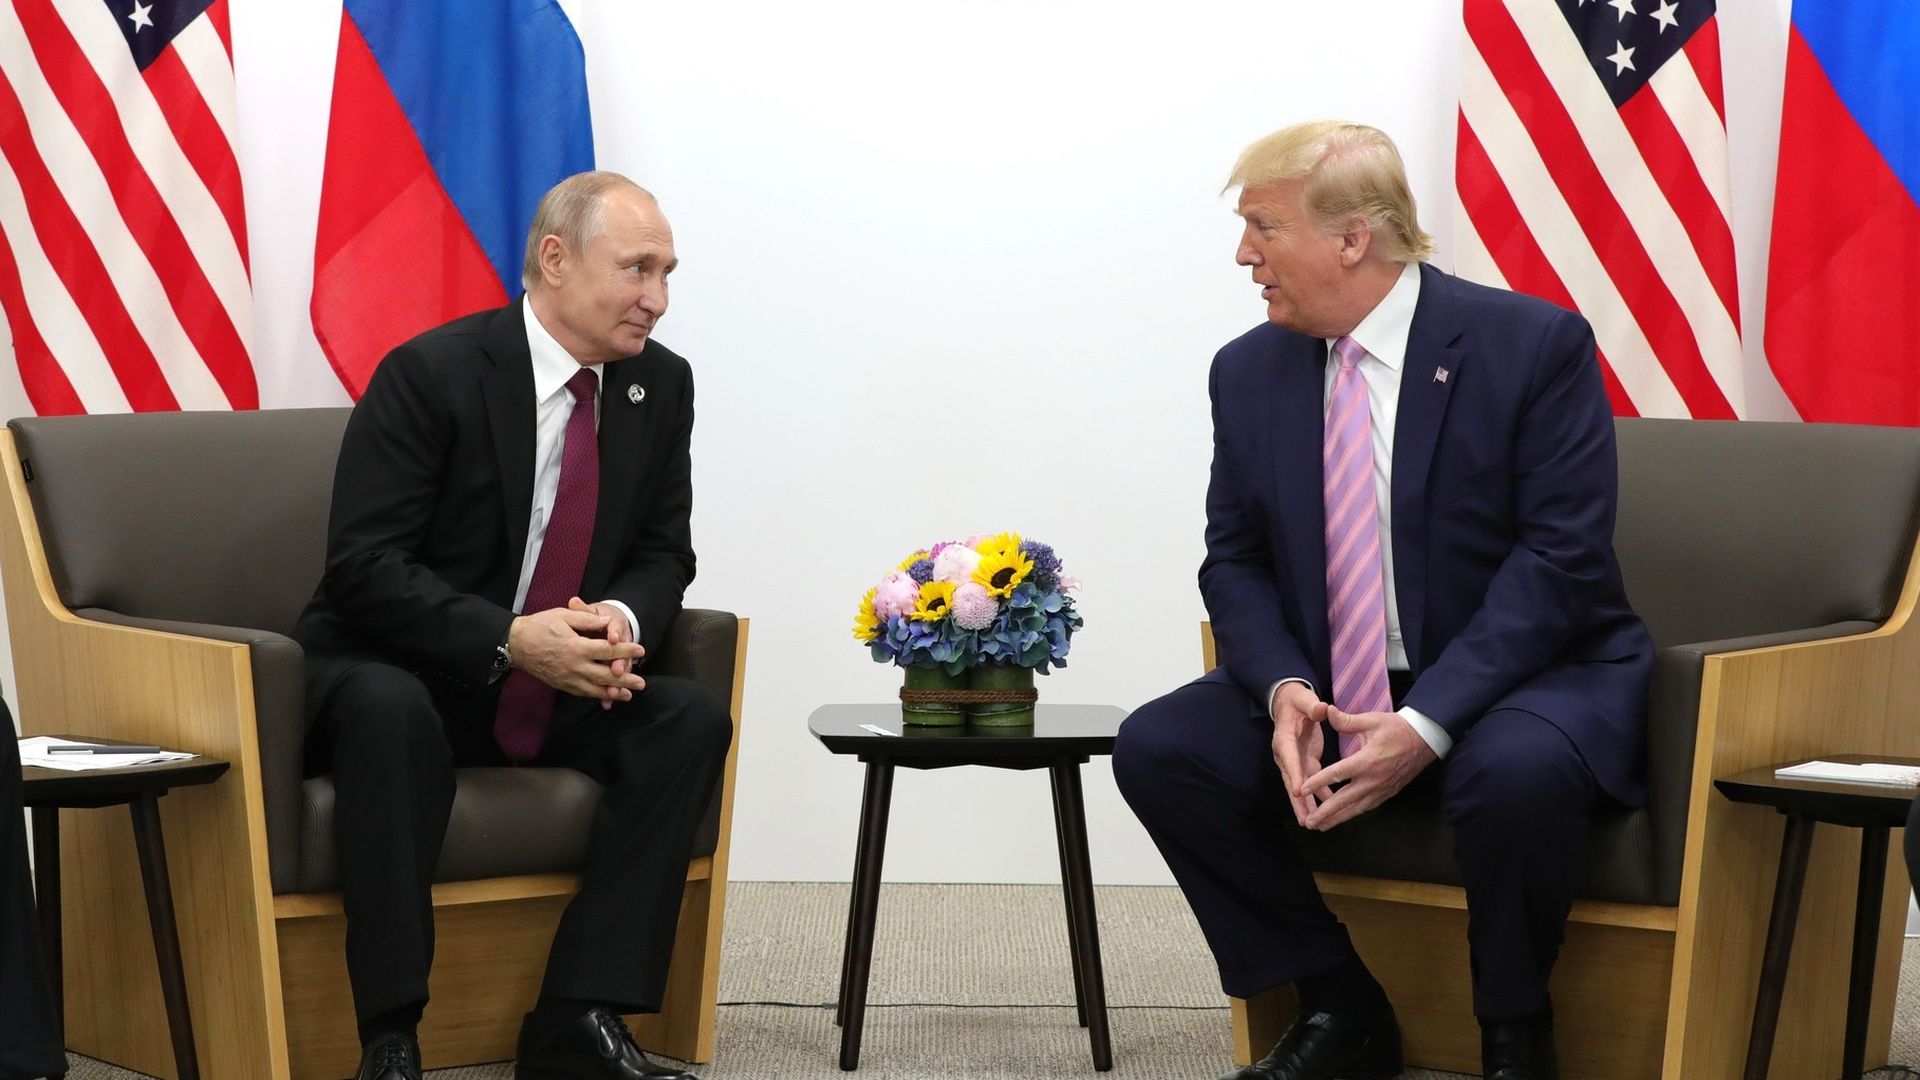 Vladimir Putin and Donald Trump speak to each other while seated